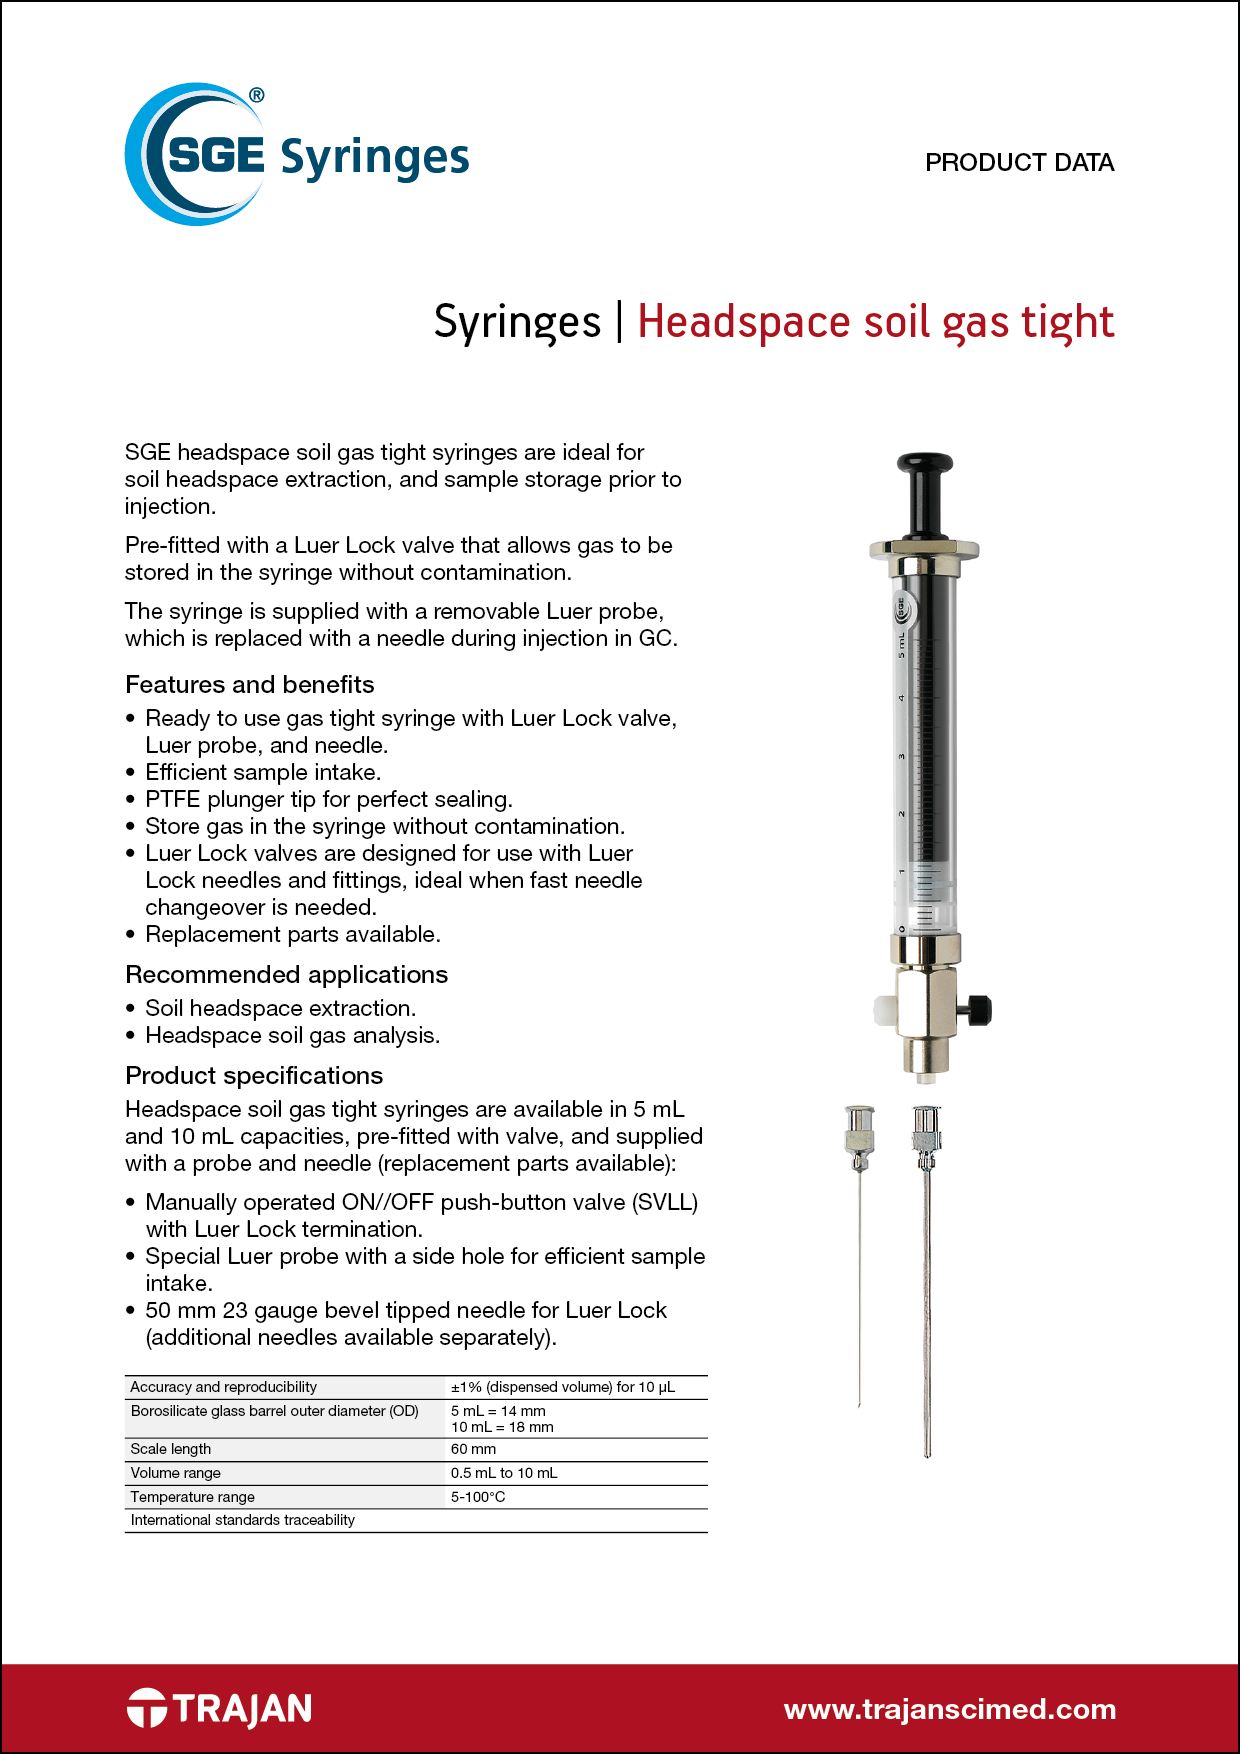 Product Data Sheet - SGE headspace soil gas tight syringes